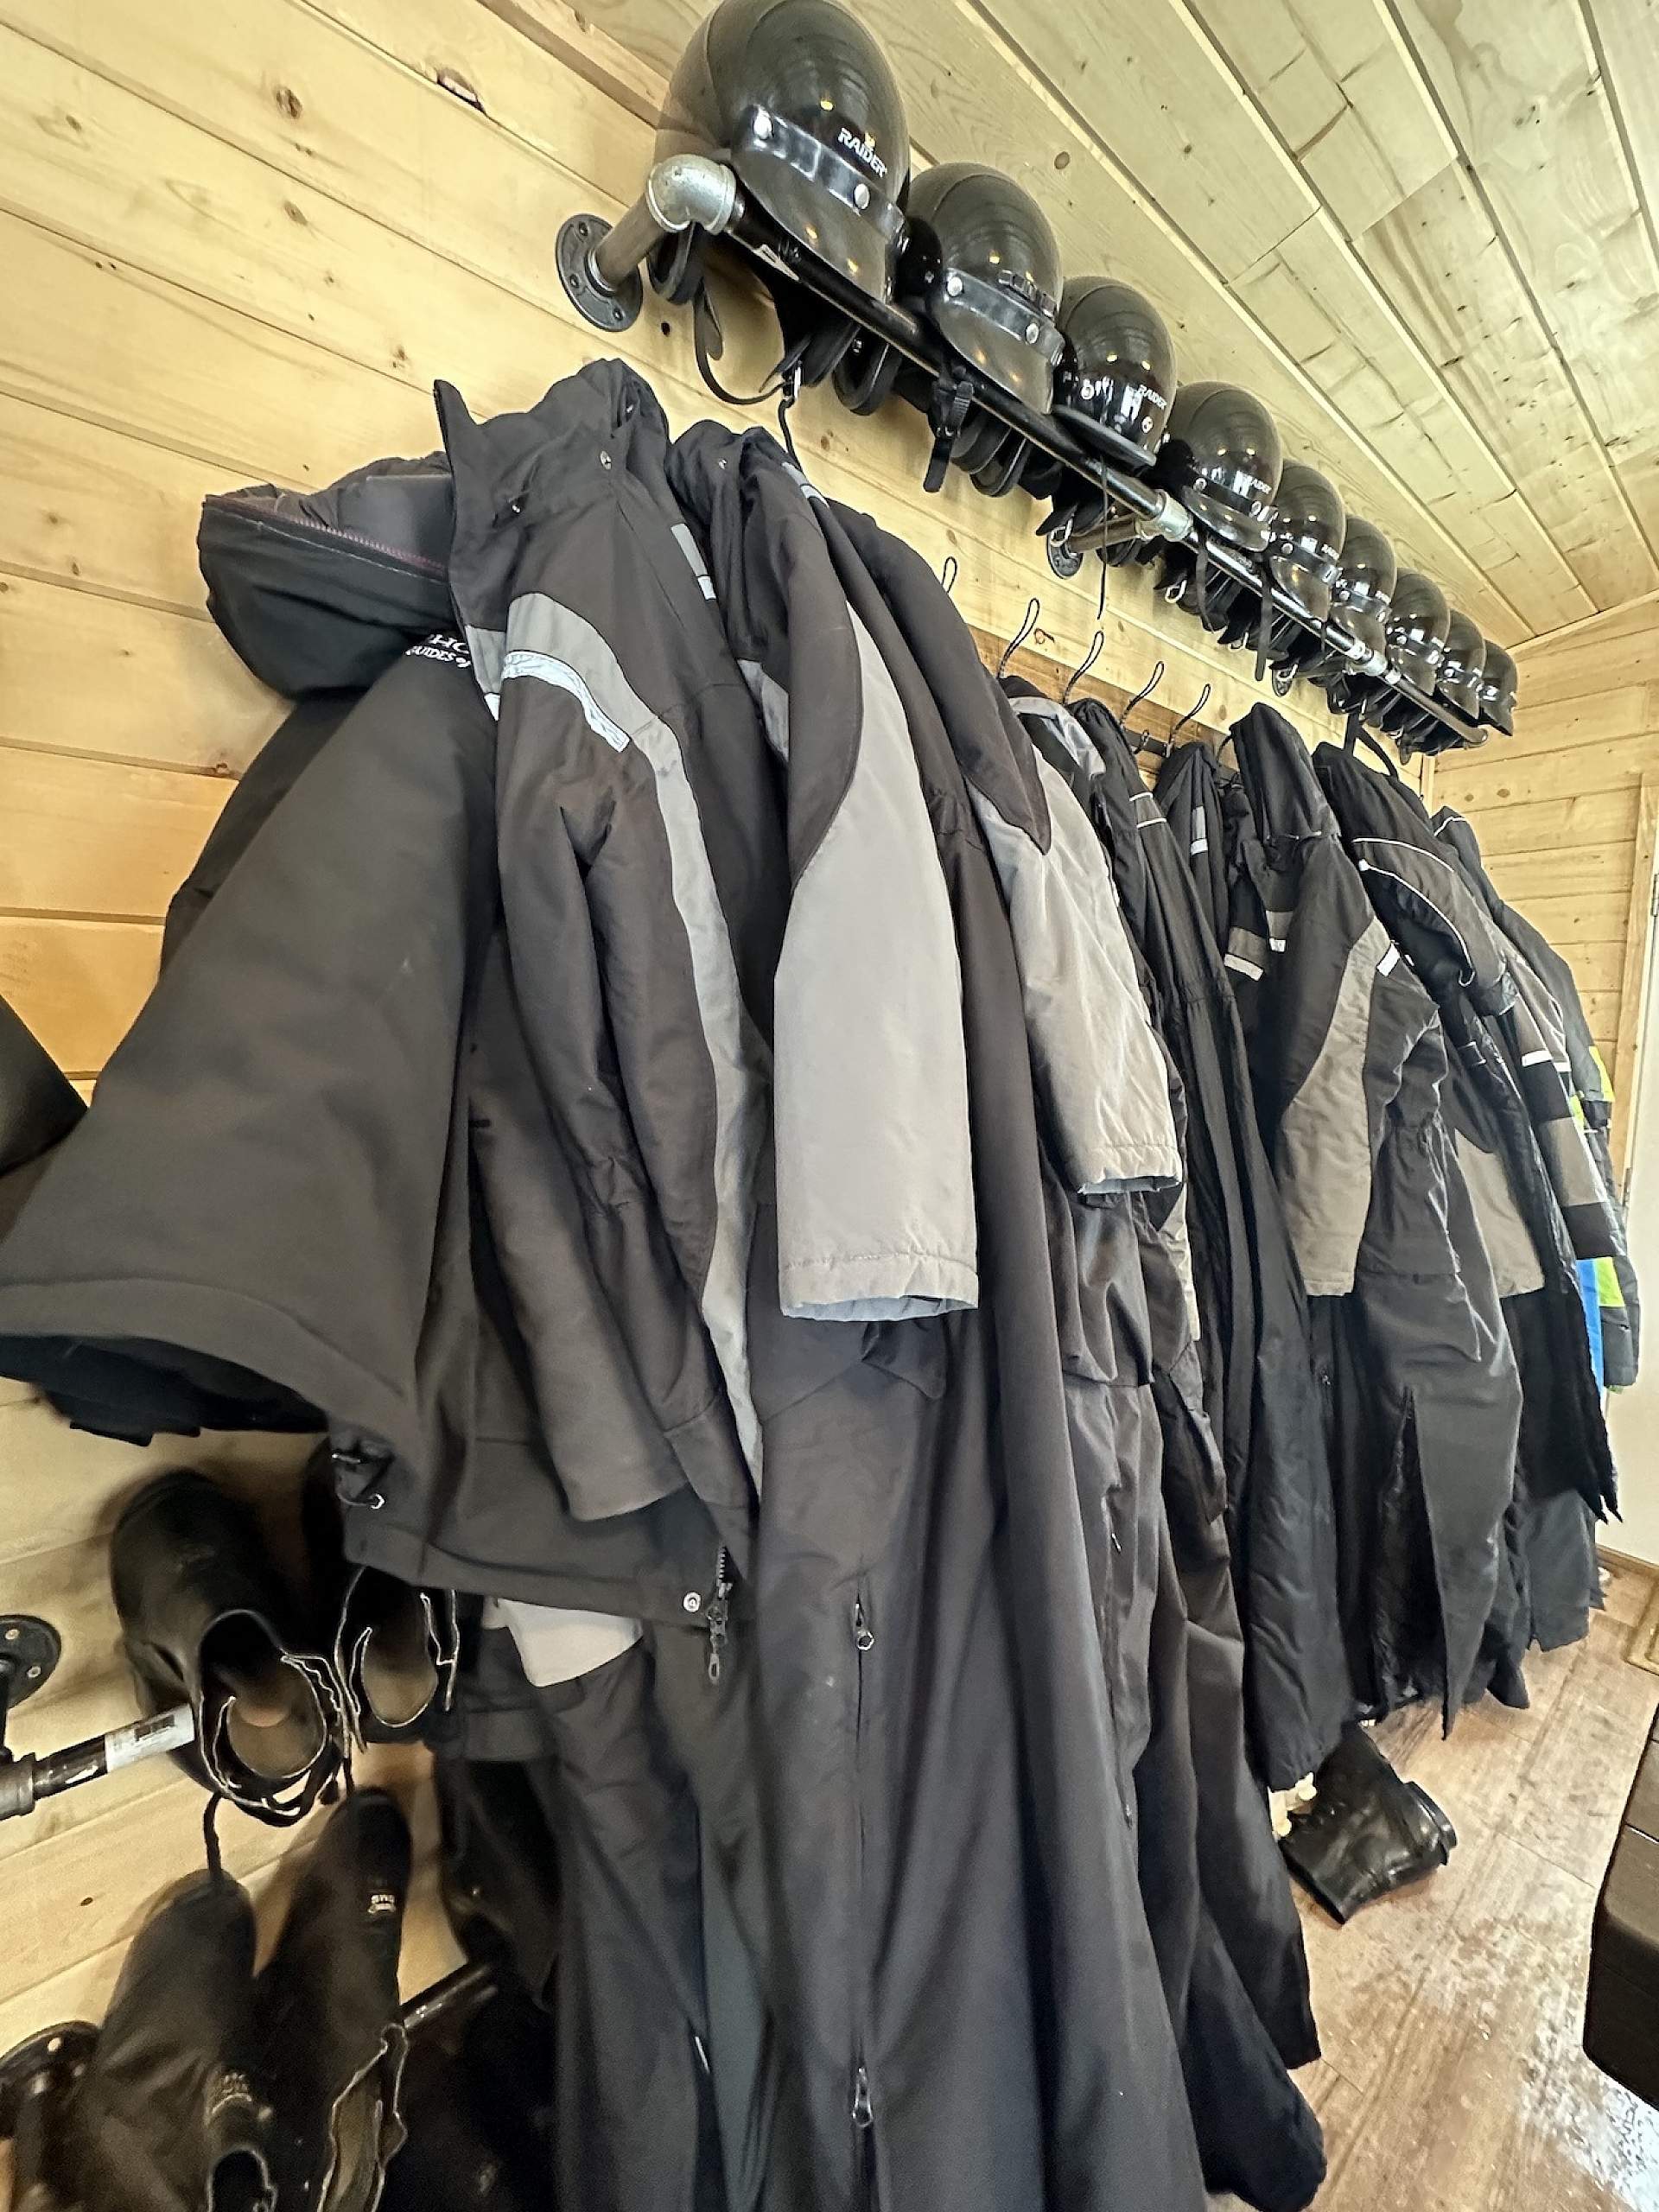 A line of snowgear hangs on the wall at Snowhook Adventure Guides of Alaska.